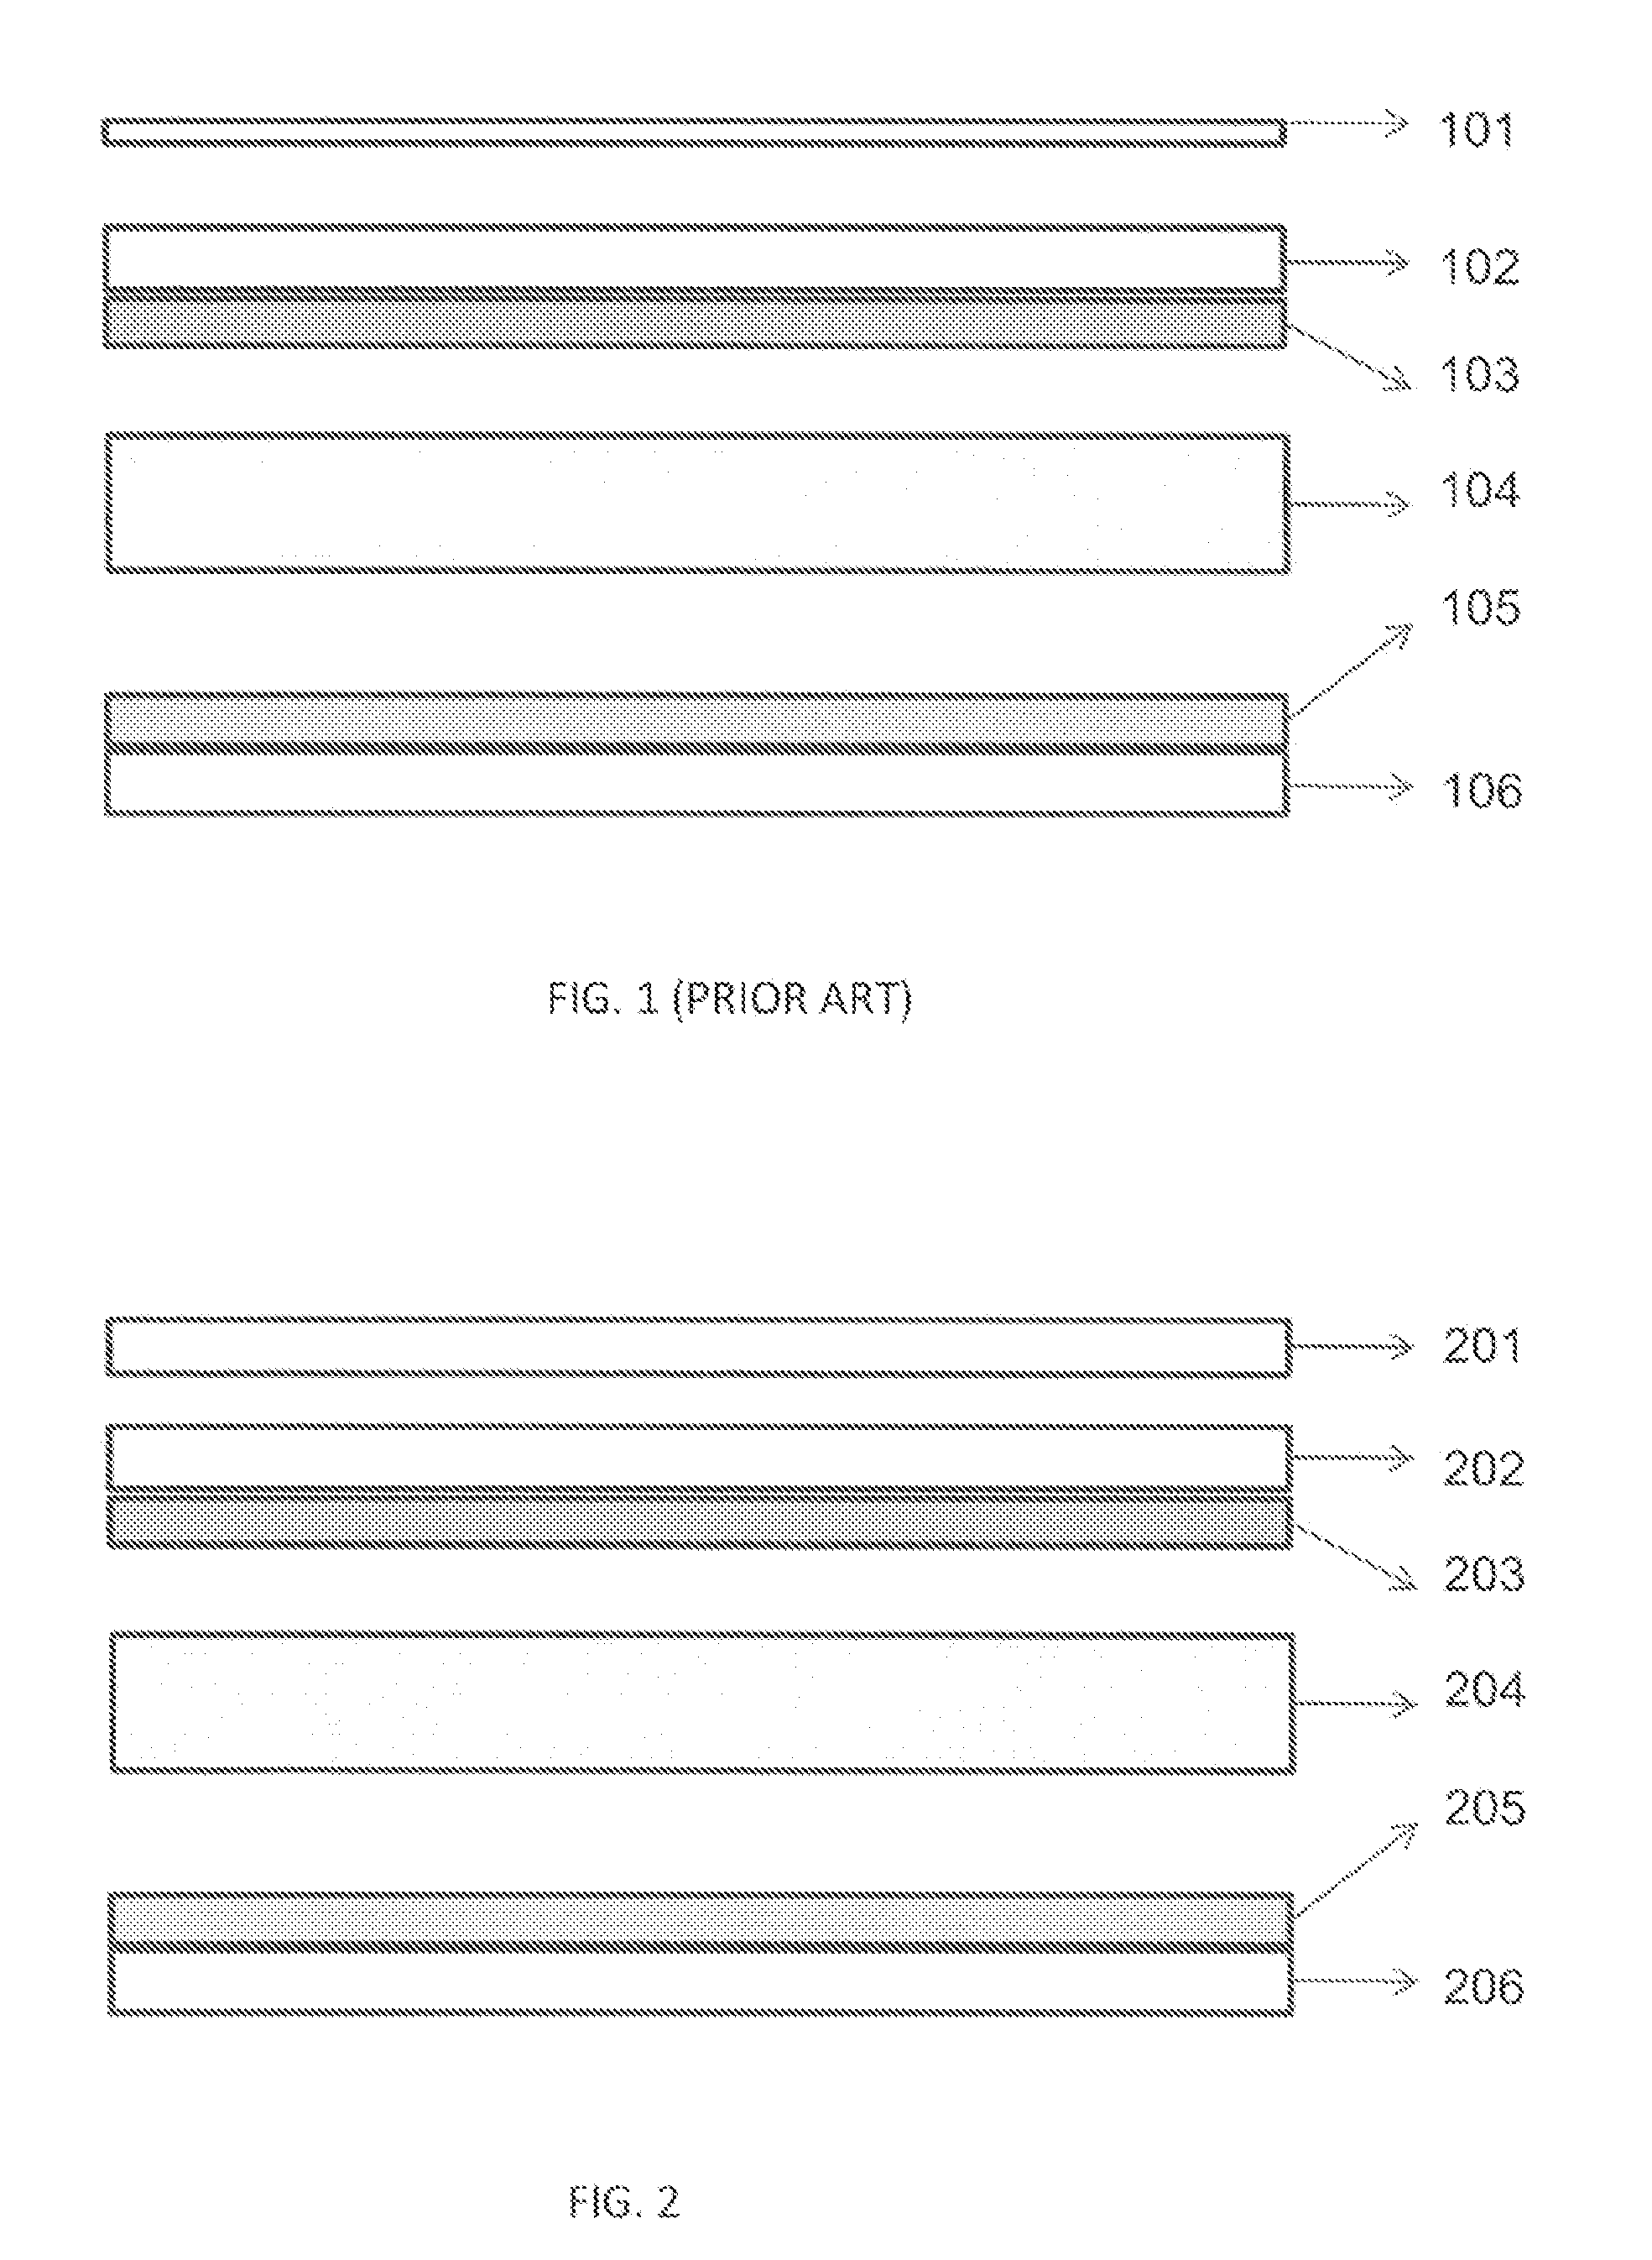 Batteries and methods of manufacturing batteries